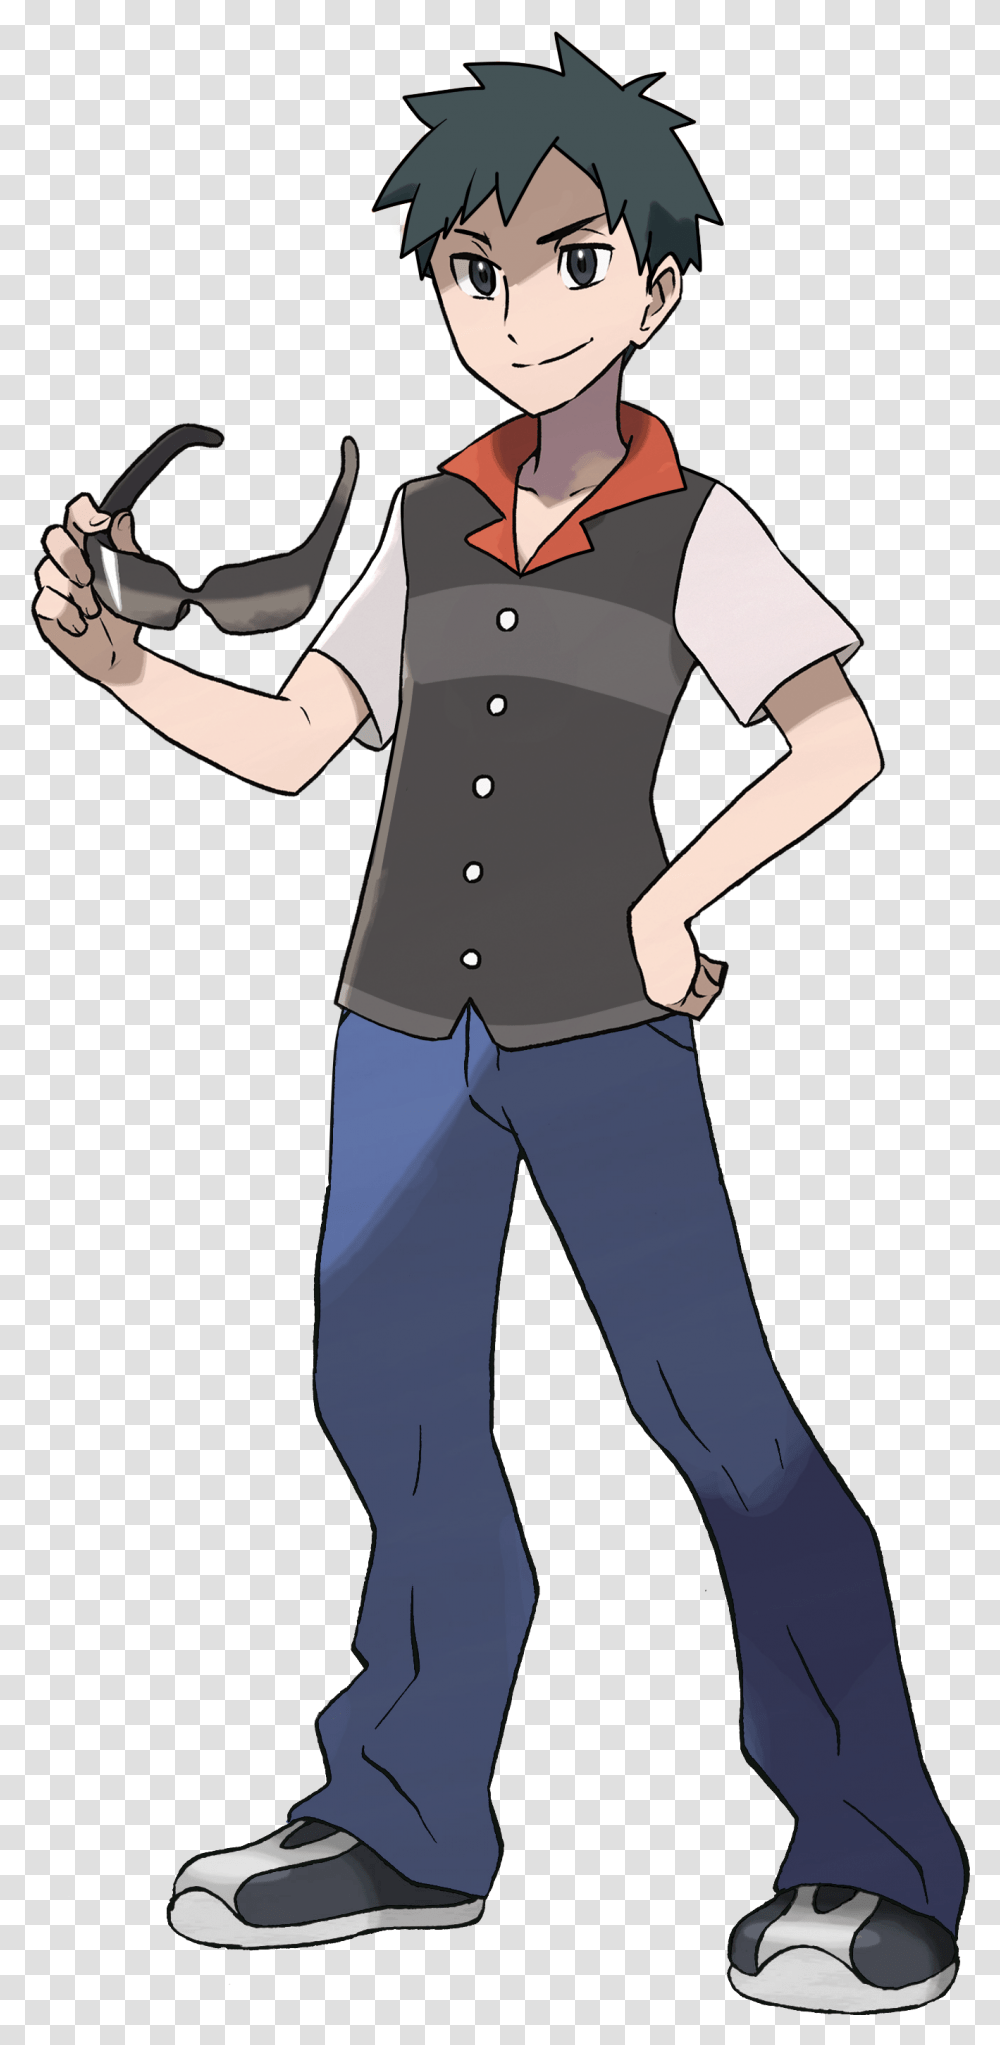 Adult Pokemon Trainer Pokemon Trainer, Person, Clothing, Female, Girl Transparent Png